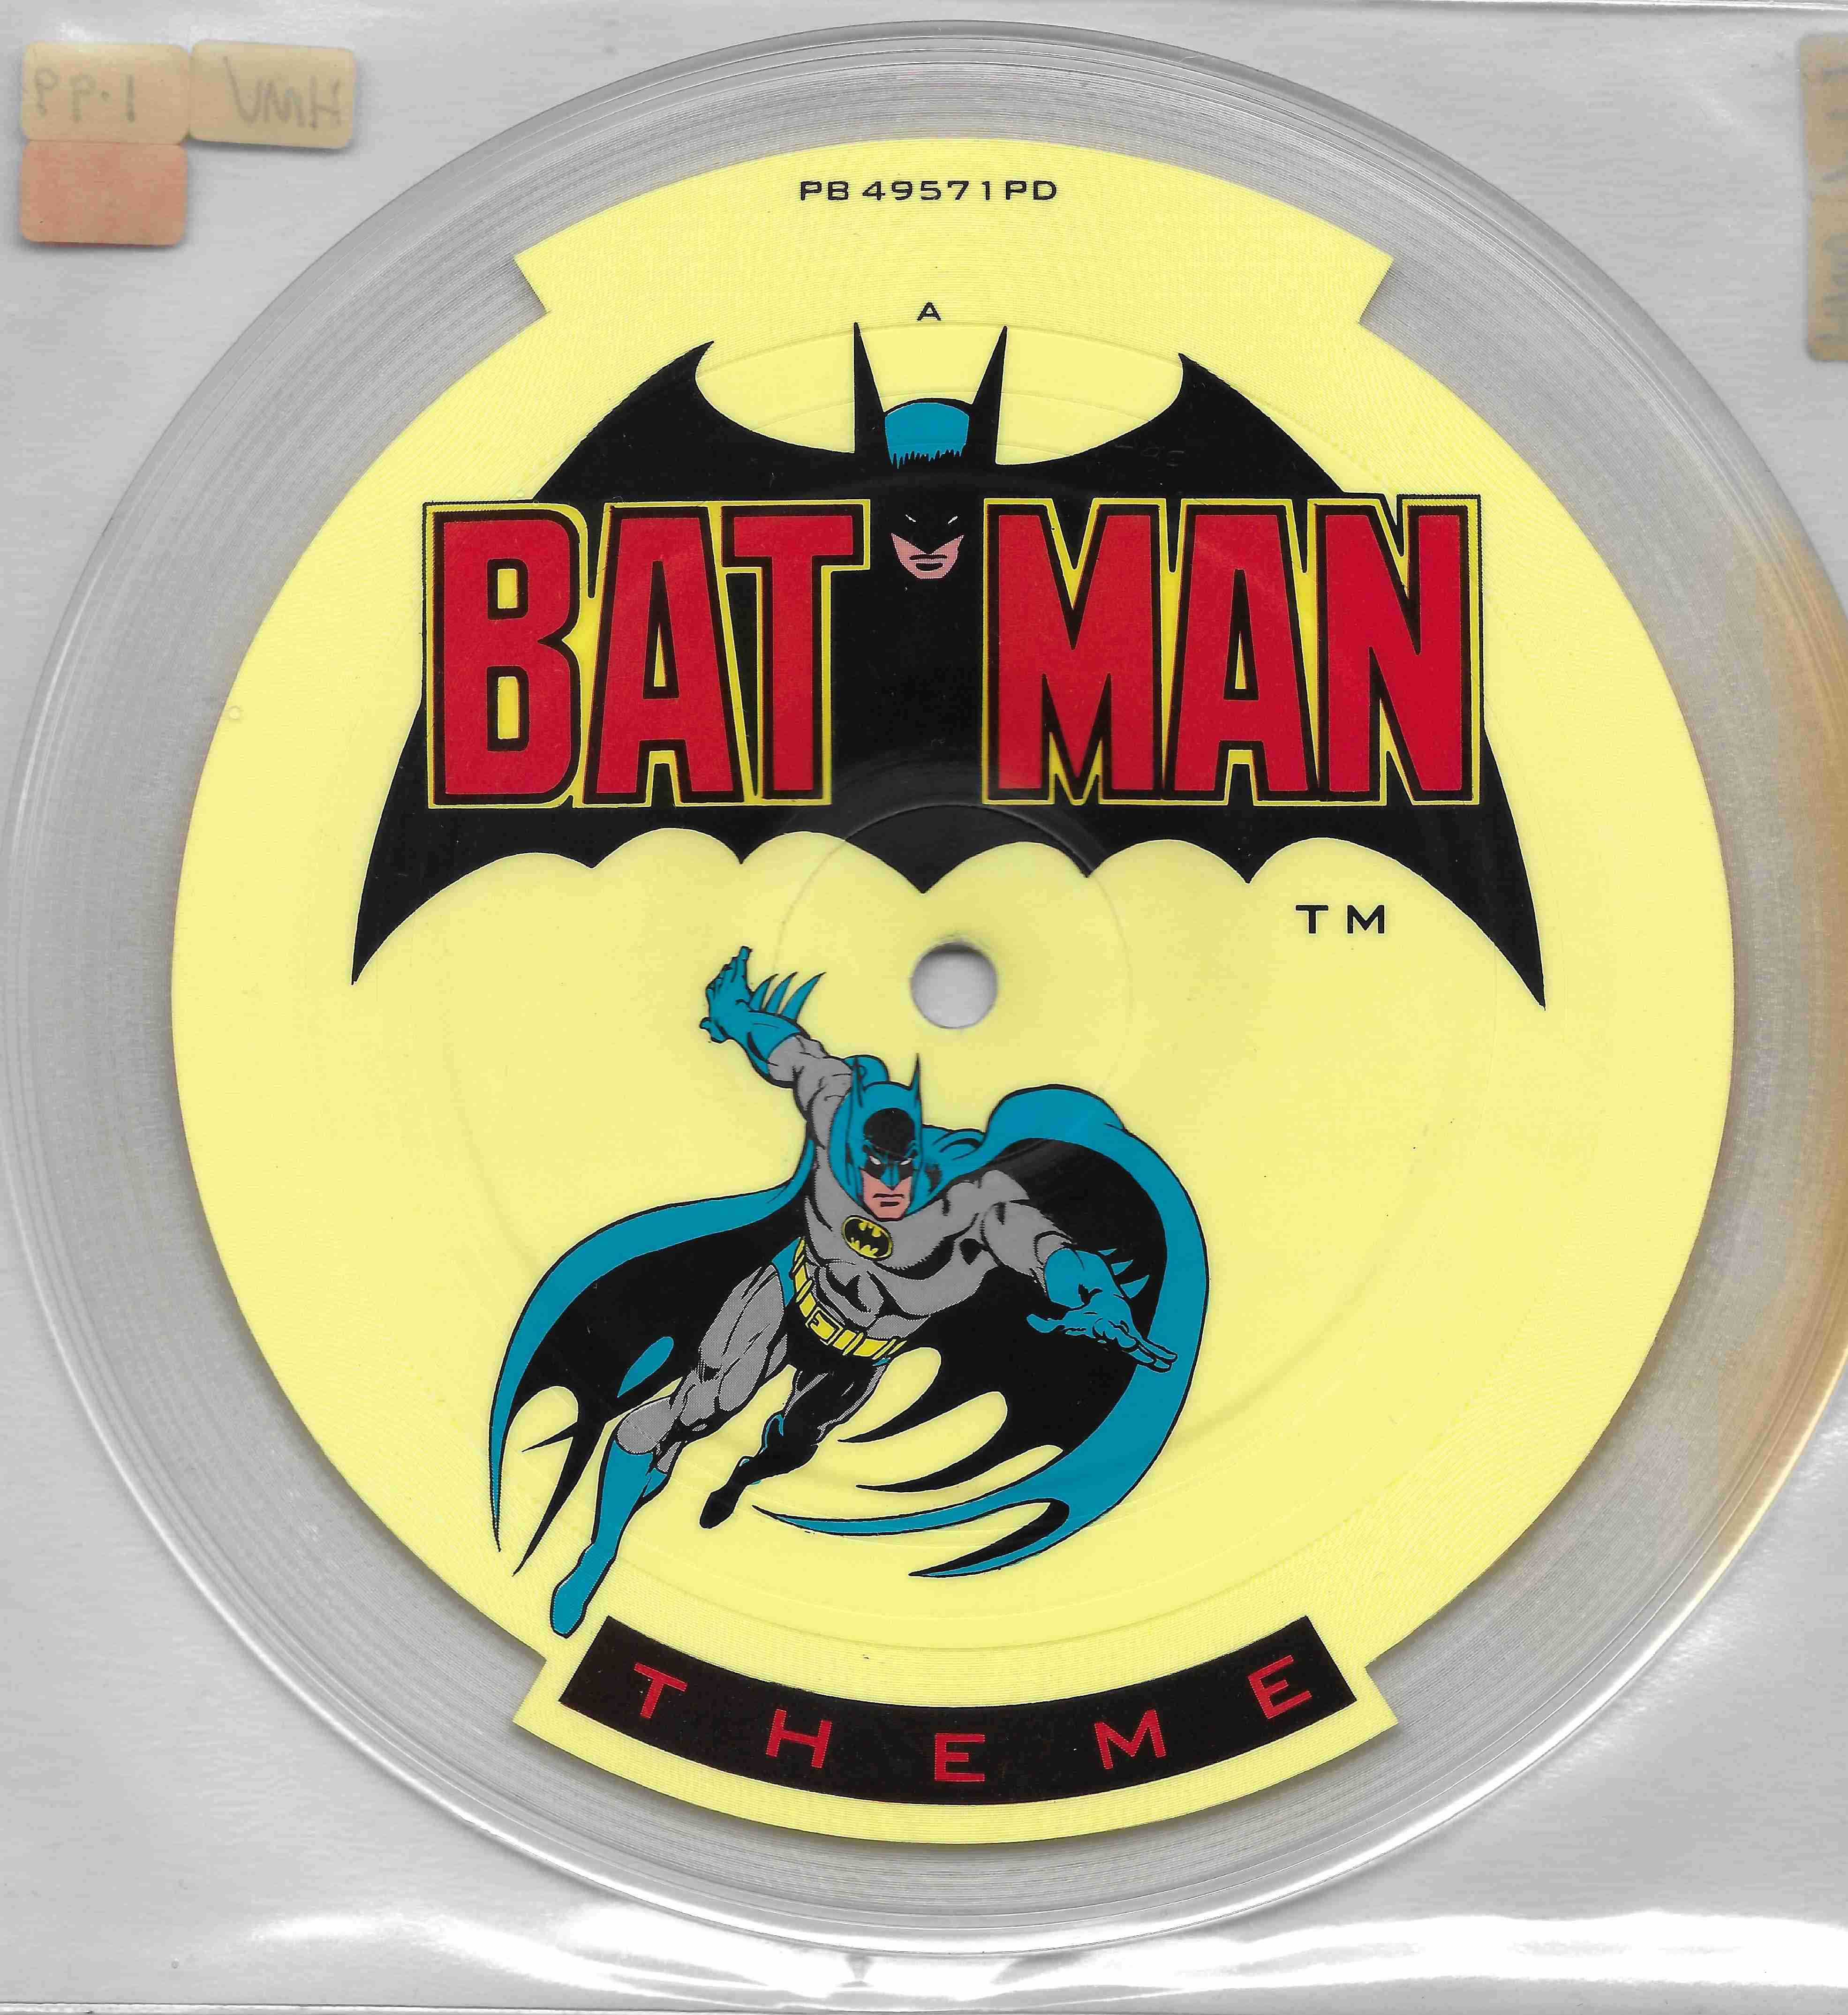 Picture of Batman by artist Neal Hefti from the BBC singles - Records and Tapes library